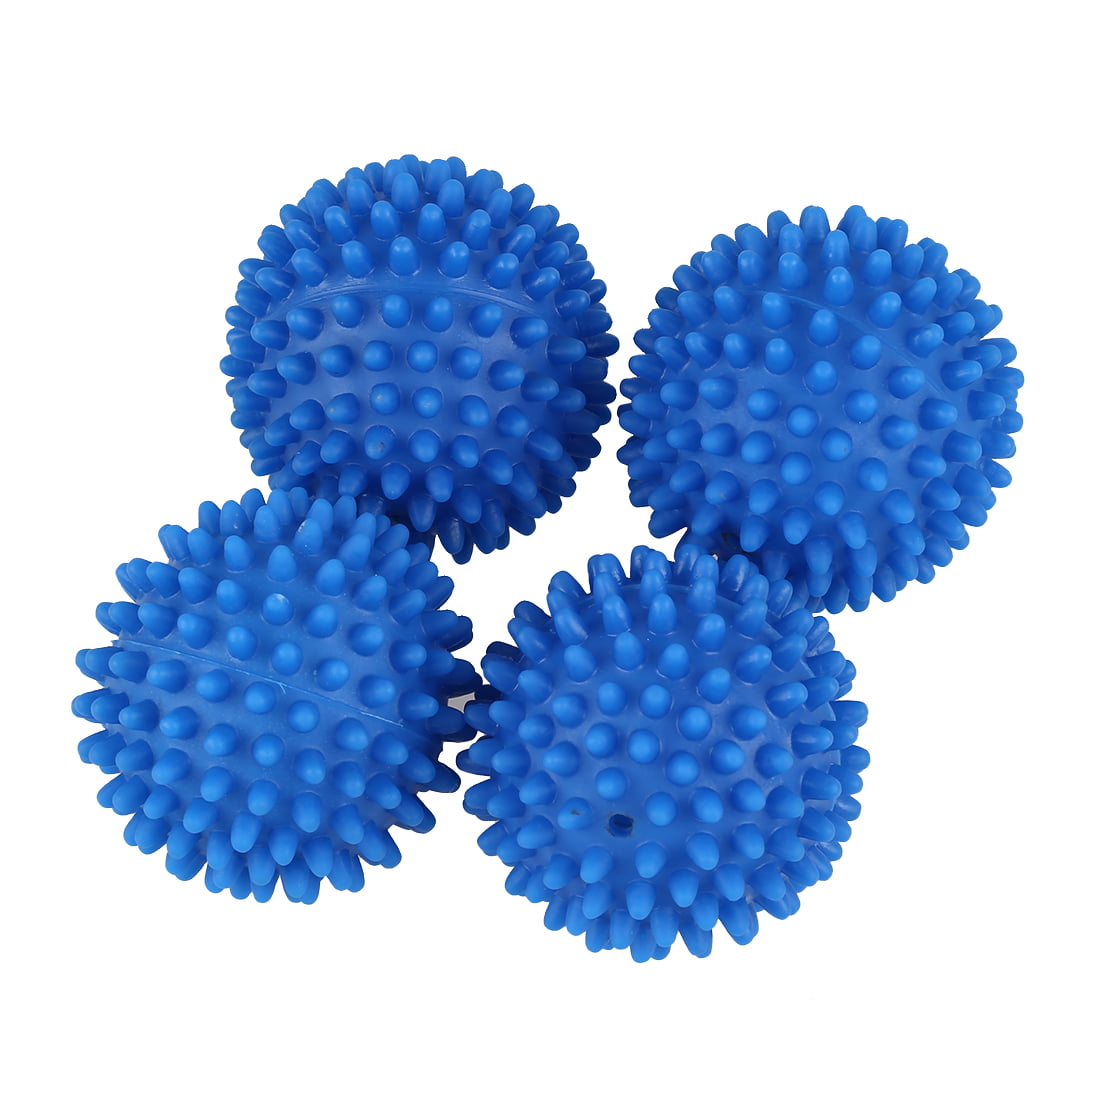 Details about   4x/Set Reusable Laundry Washing Machine Dryer Balls Drying Fabric Softener Ball 